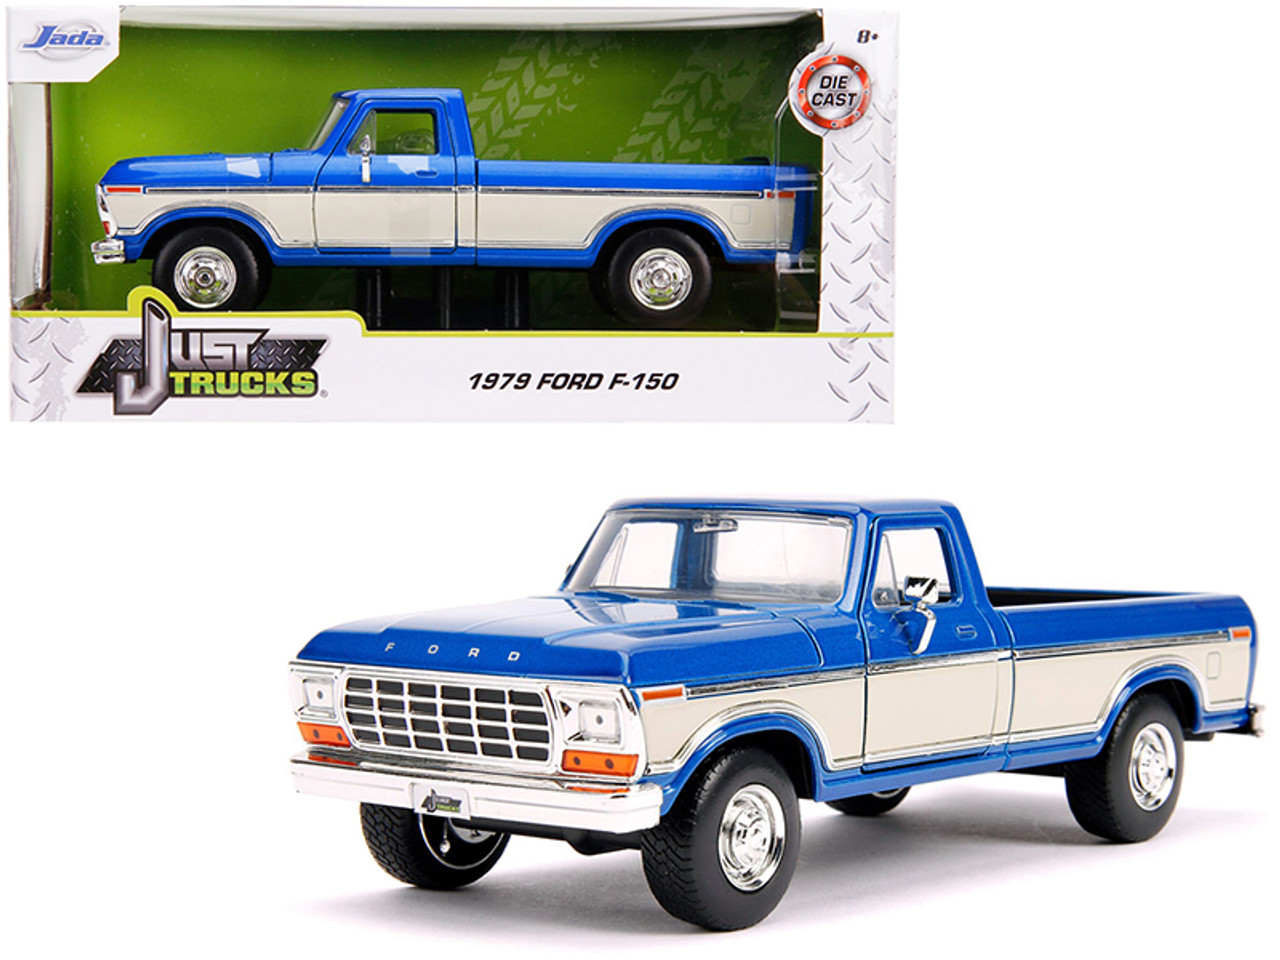 1979 Ford F-150 Pickup Truck Stock Candy Blue Metallic and Cream "Just Trucks" 1/24 Diecast Model Car by Jada